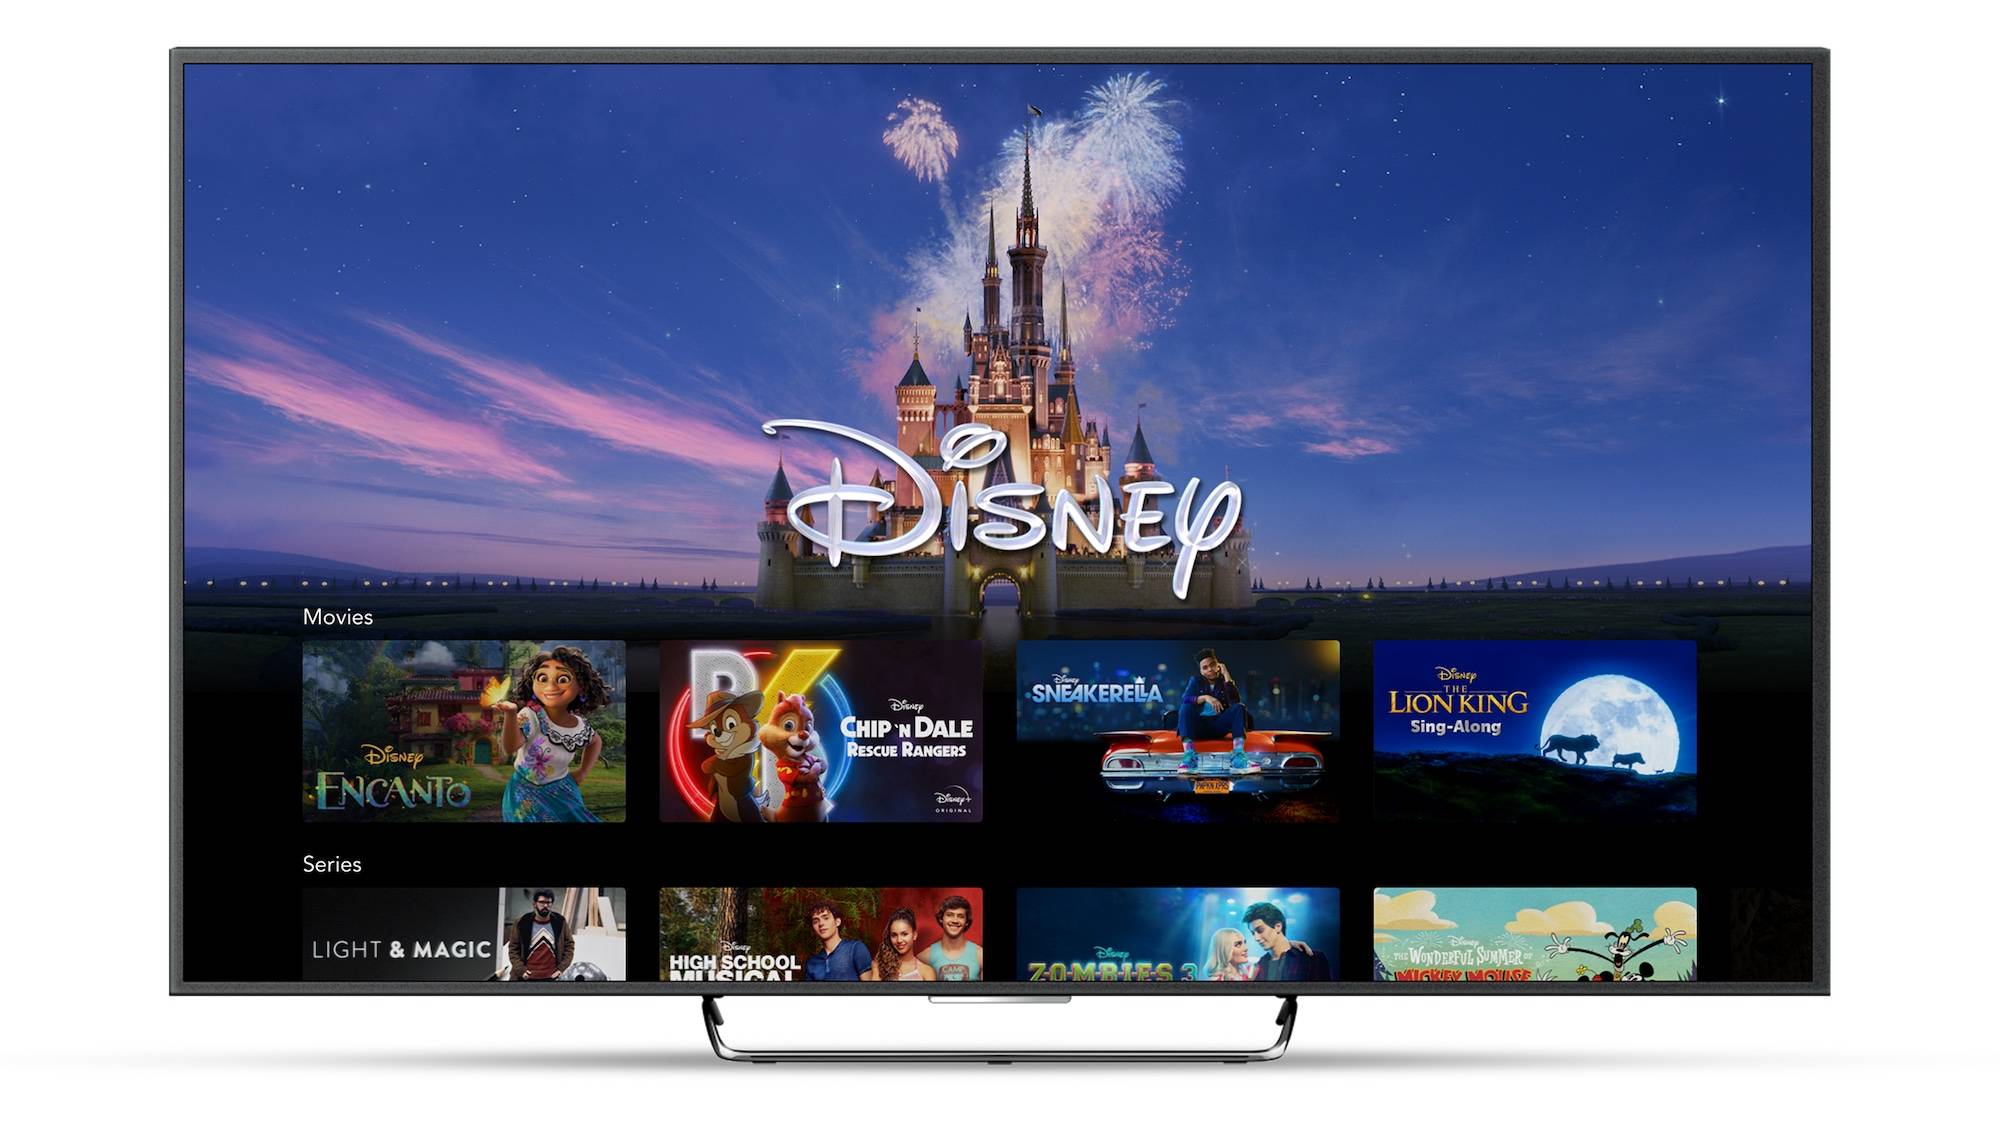 Disney+, Hulu, and Max Combine Forces in Exclusive Streaming Bundle